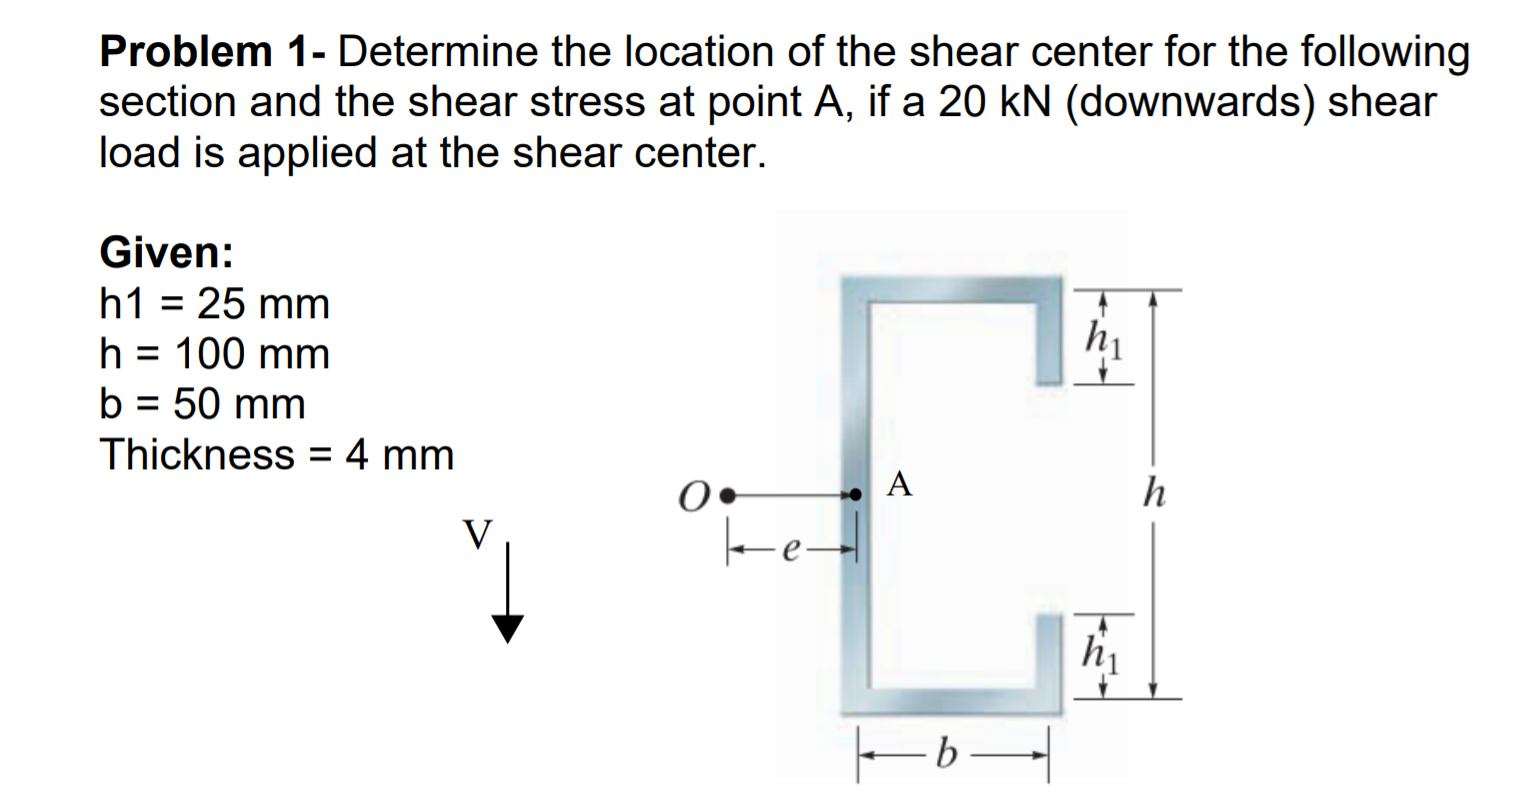 Problem 1- Determine the location of the shear center for the following
section and the shear stress at point A, if a 20 kN (downwards) shear
load is applied at the shear center.
Given:
h1 = 25 mm
hi
h = 100 mm
b = 50 mm
Thickness
4 mm
0•
ke
hi
-ь —
